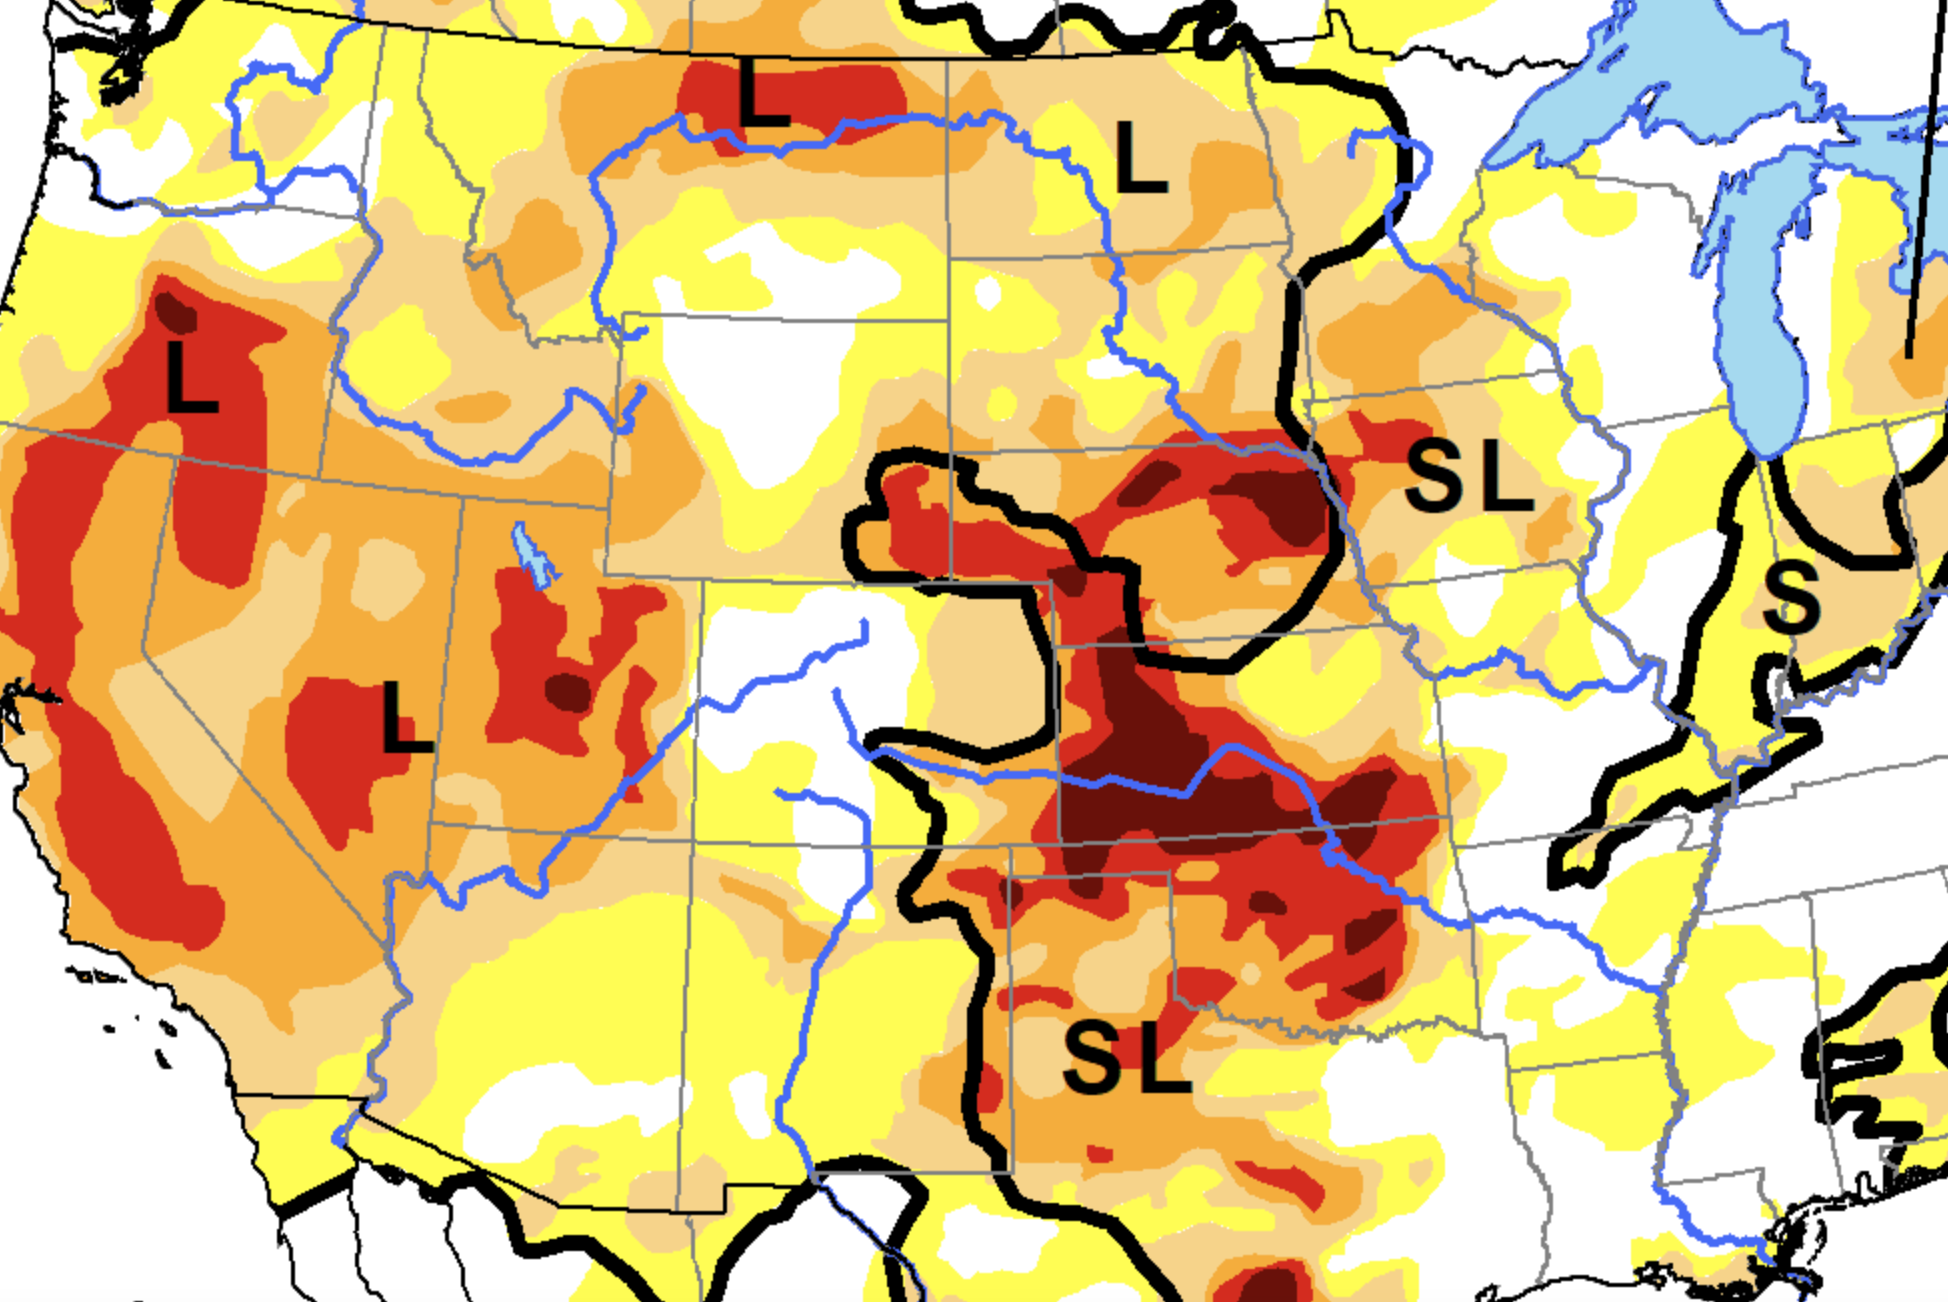 A detail from a recent map that depicts areas of intensive drought in the West and Midwest. Image courtesy of the North American Drought Monitor. The 